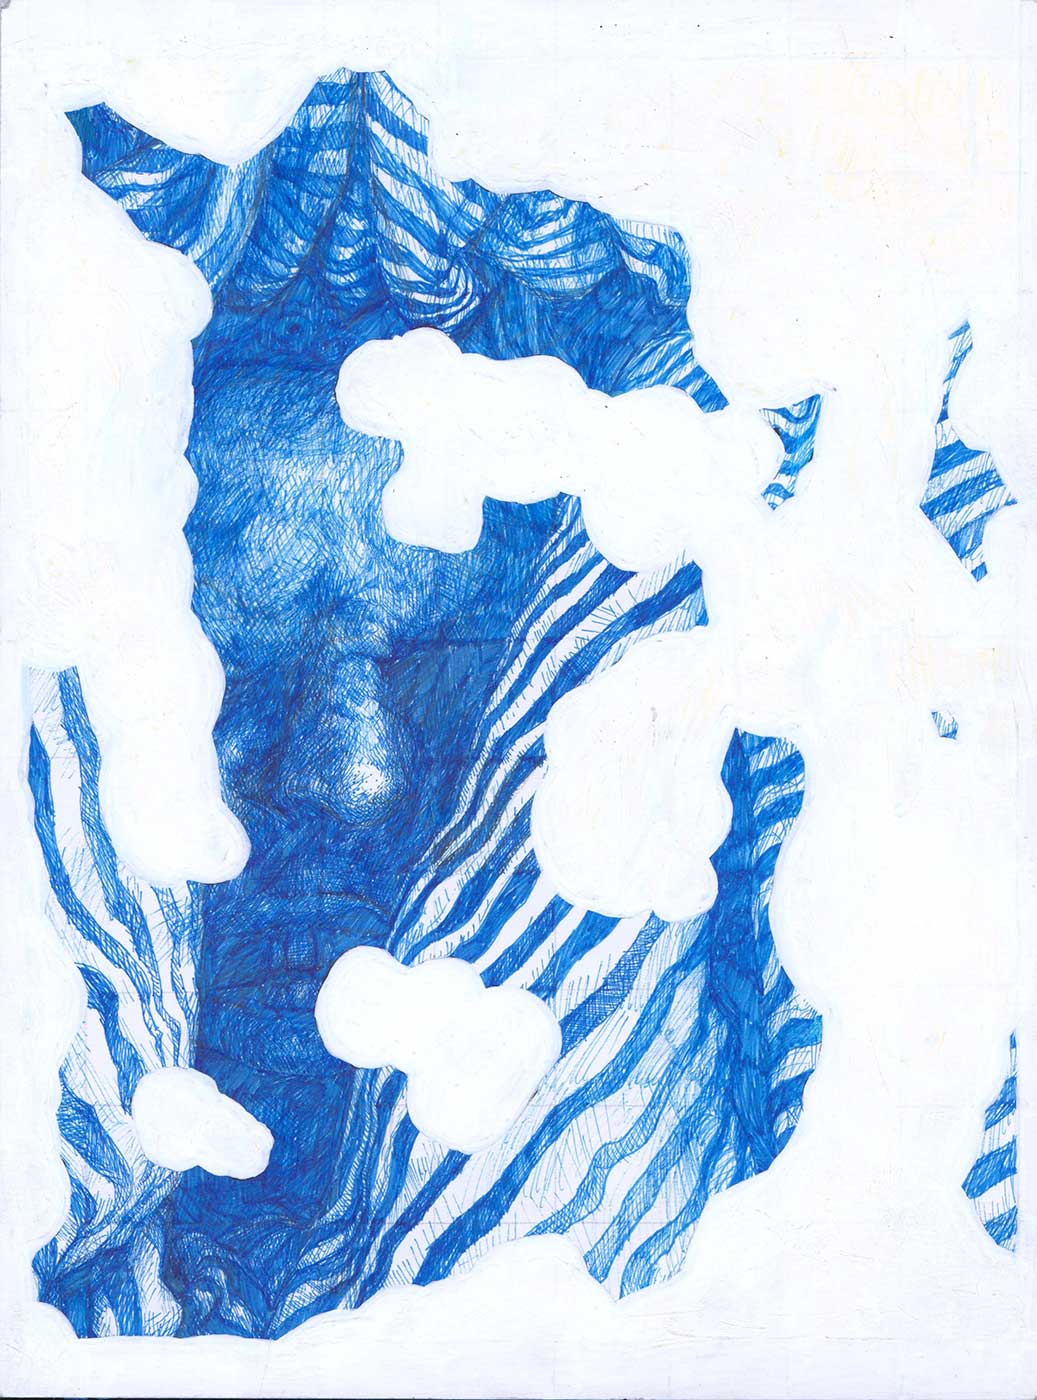 Abstract blue print showcasing lines and facial features on a white backdrop.